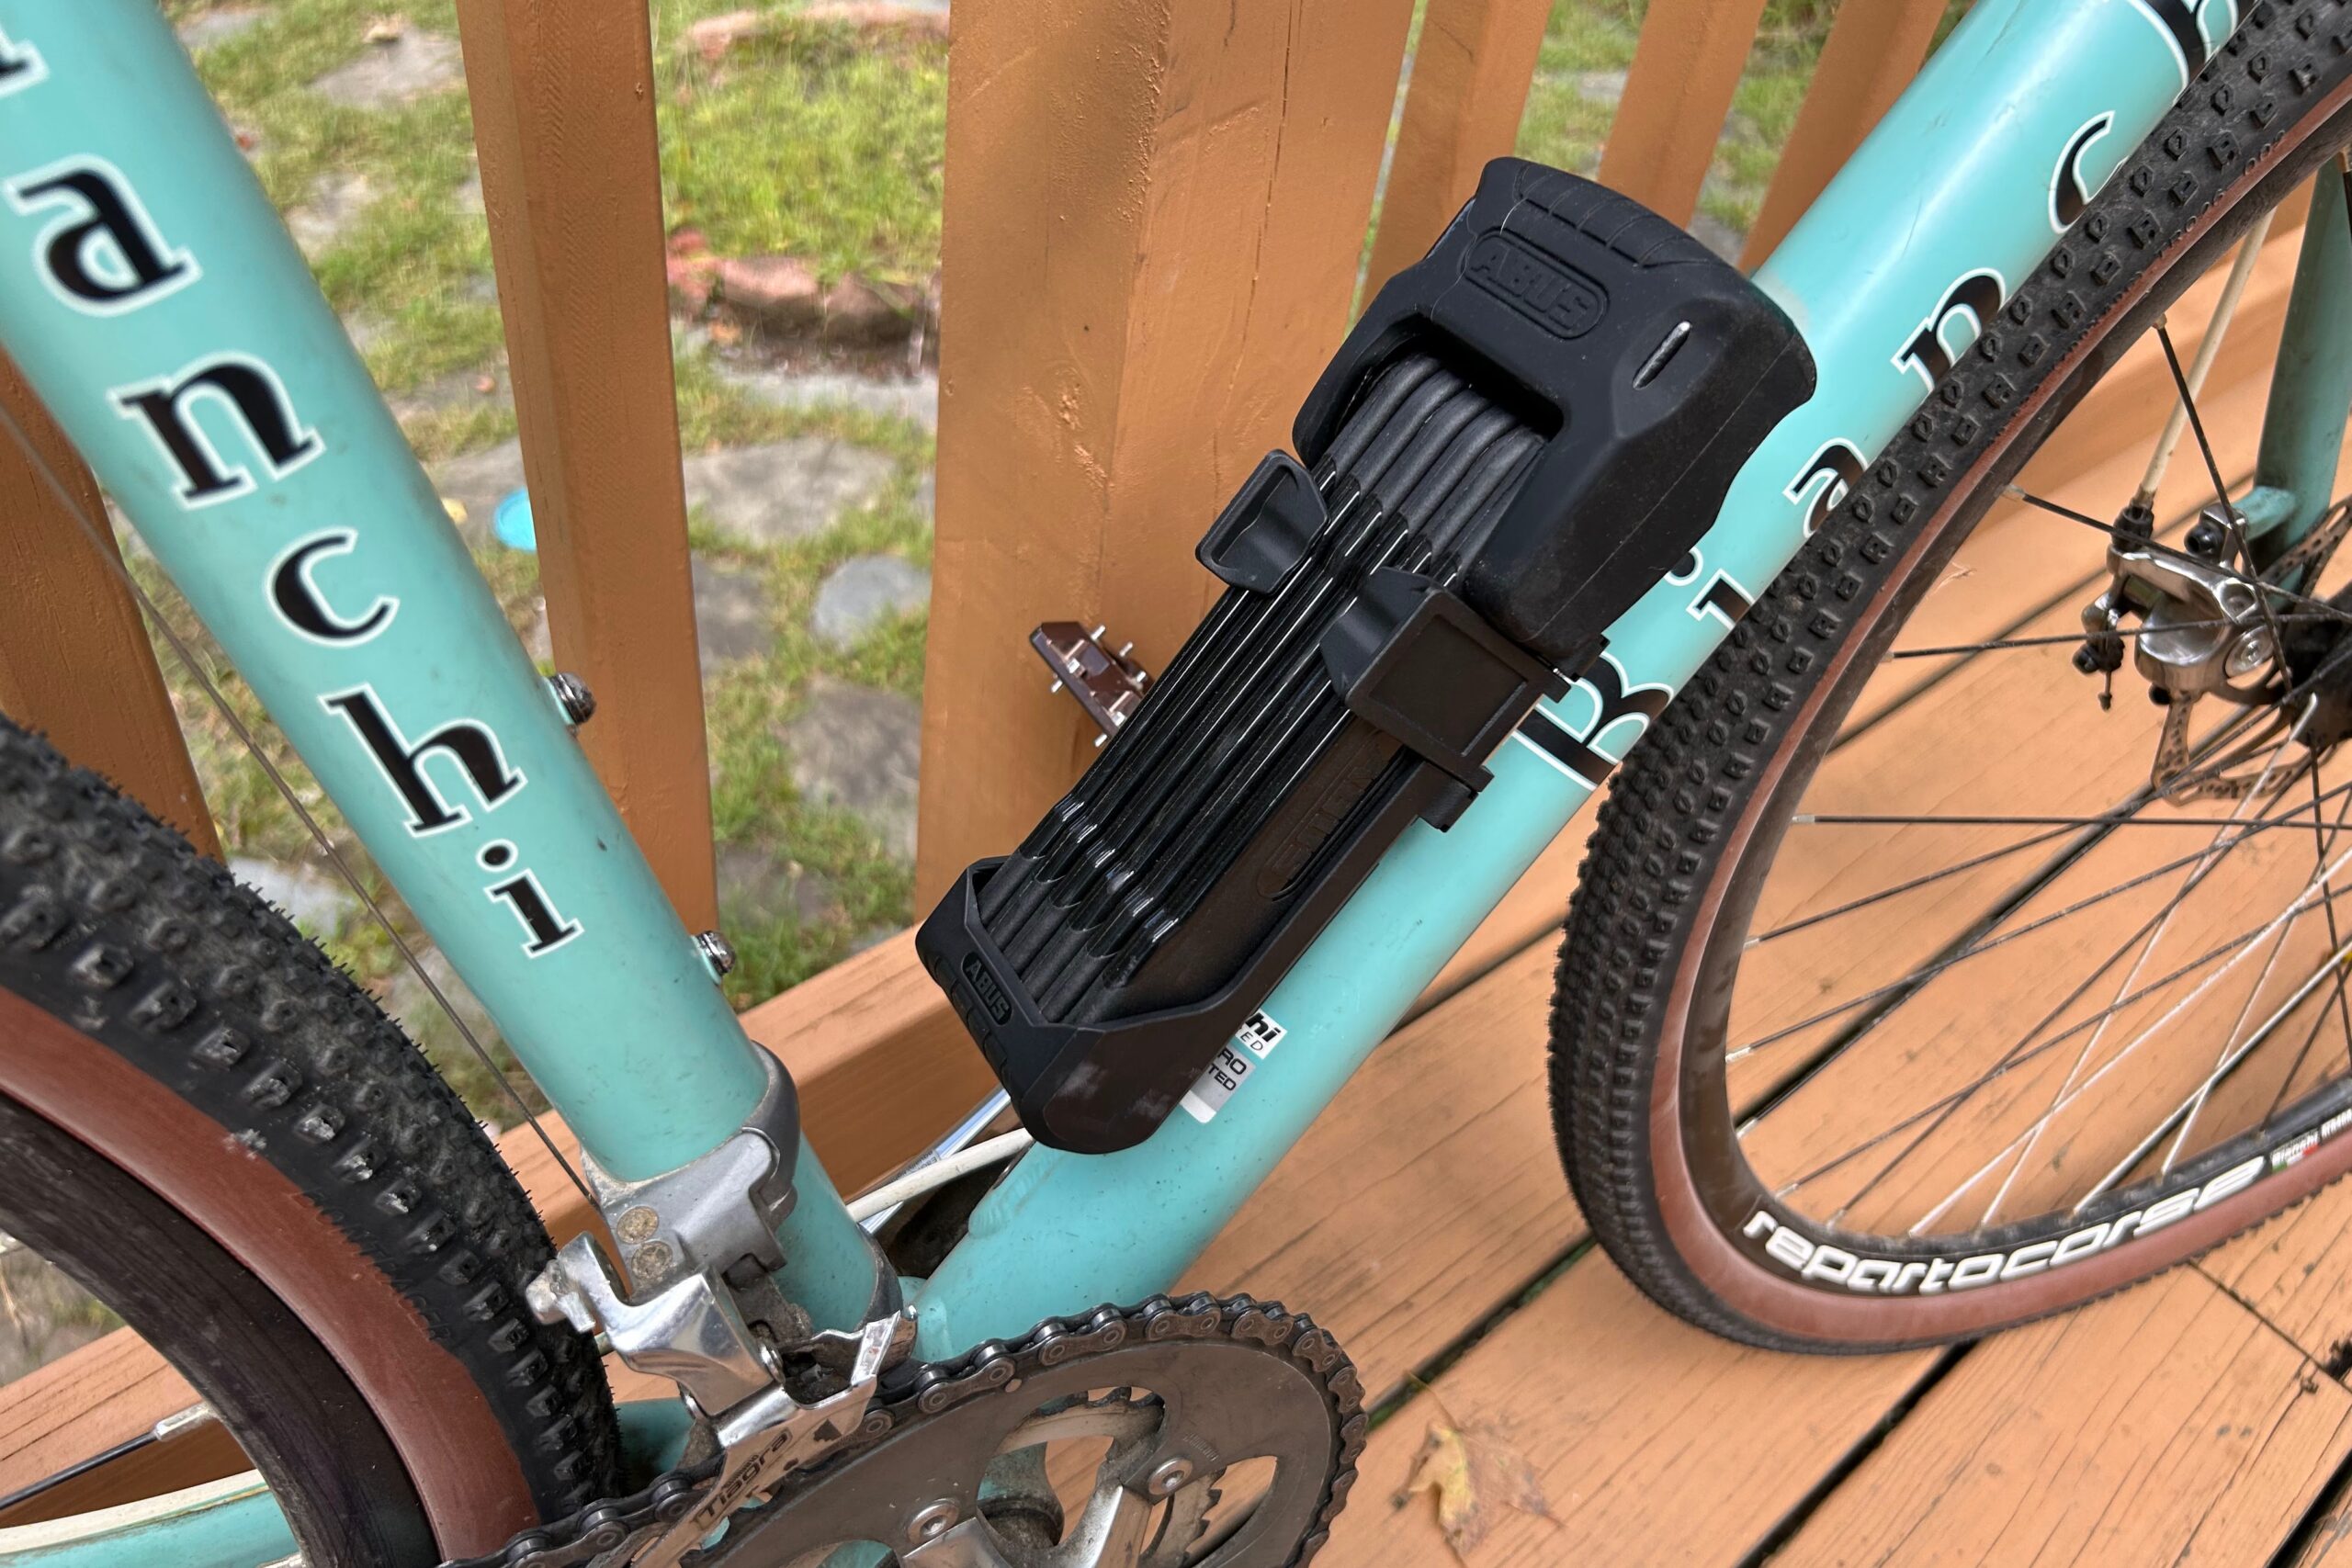 Bike Bottle Lock Trades Security for Convenience